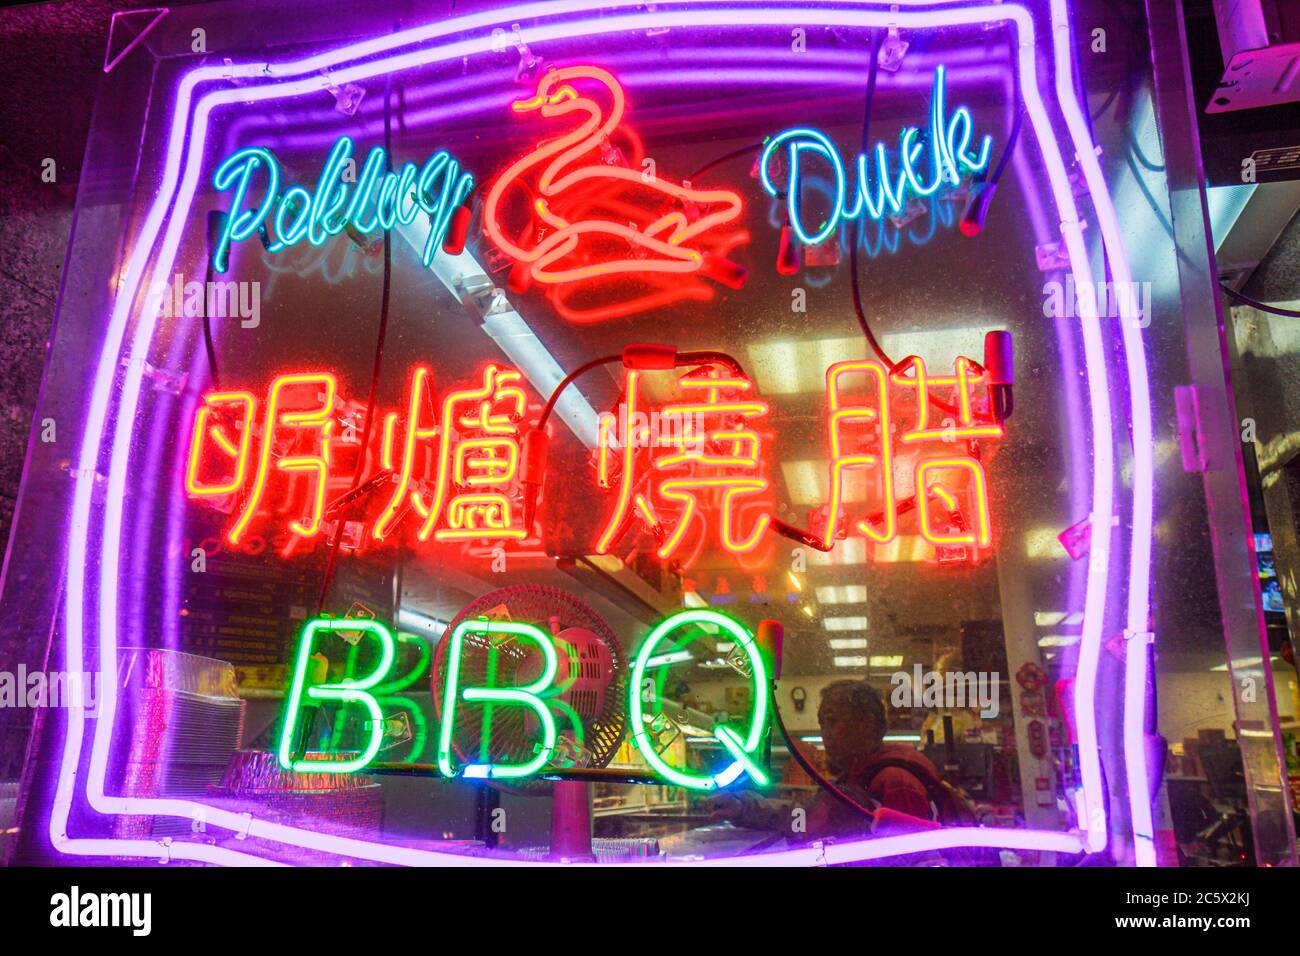 New York City,NYC NY Lower,Manhattan,Chinatown,Canal Street,neon light,sign,Chinese characters,BBQ,Peking duck,red,purple,green,night evening,NY110403 Stock Photo